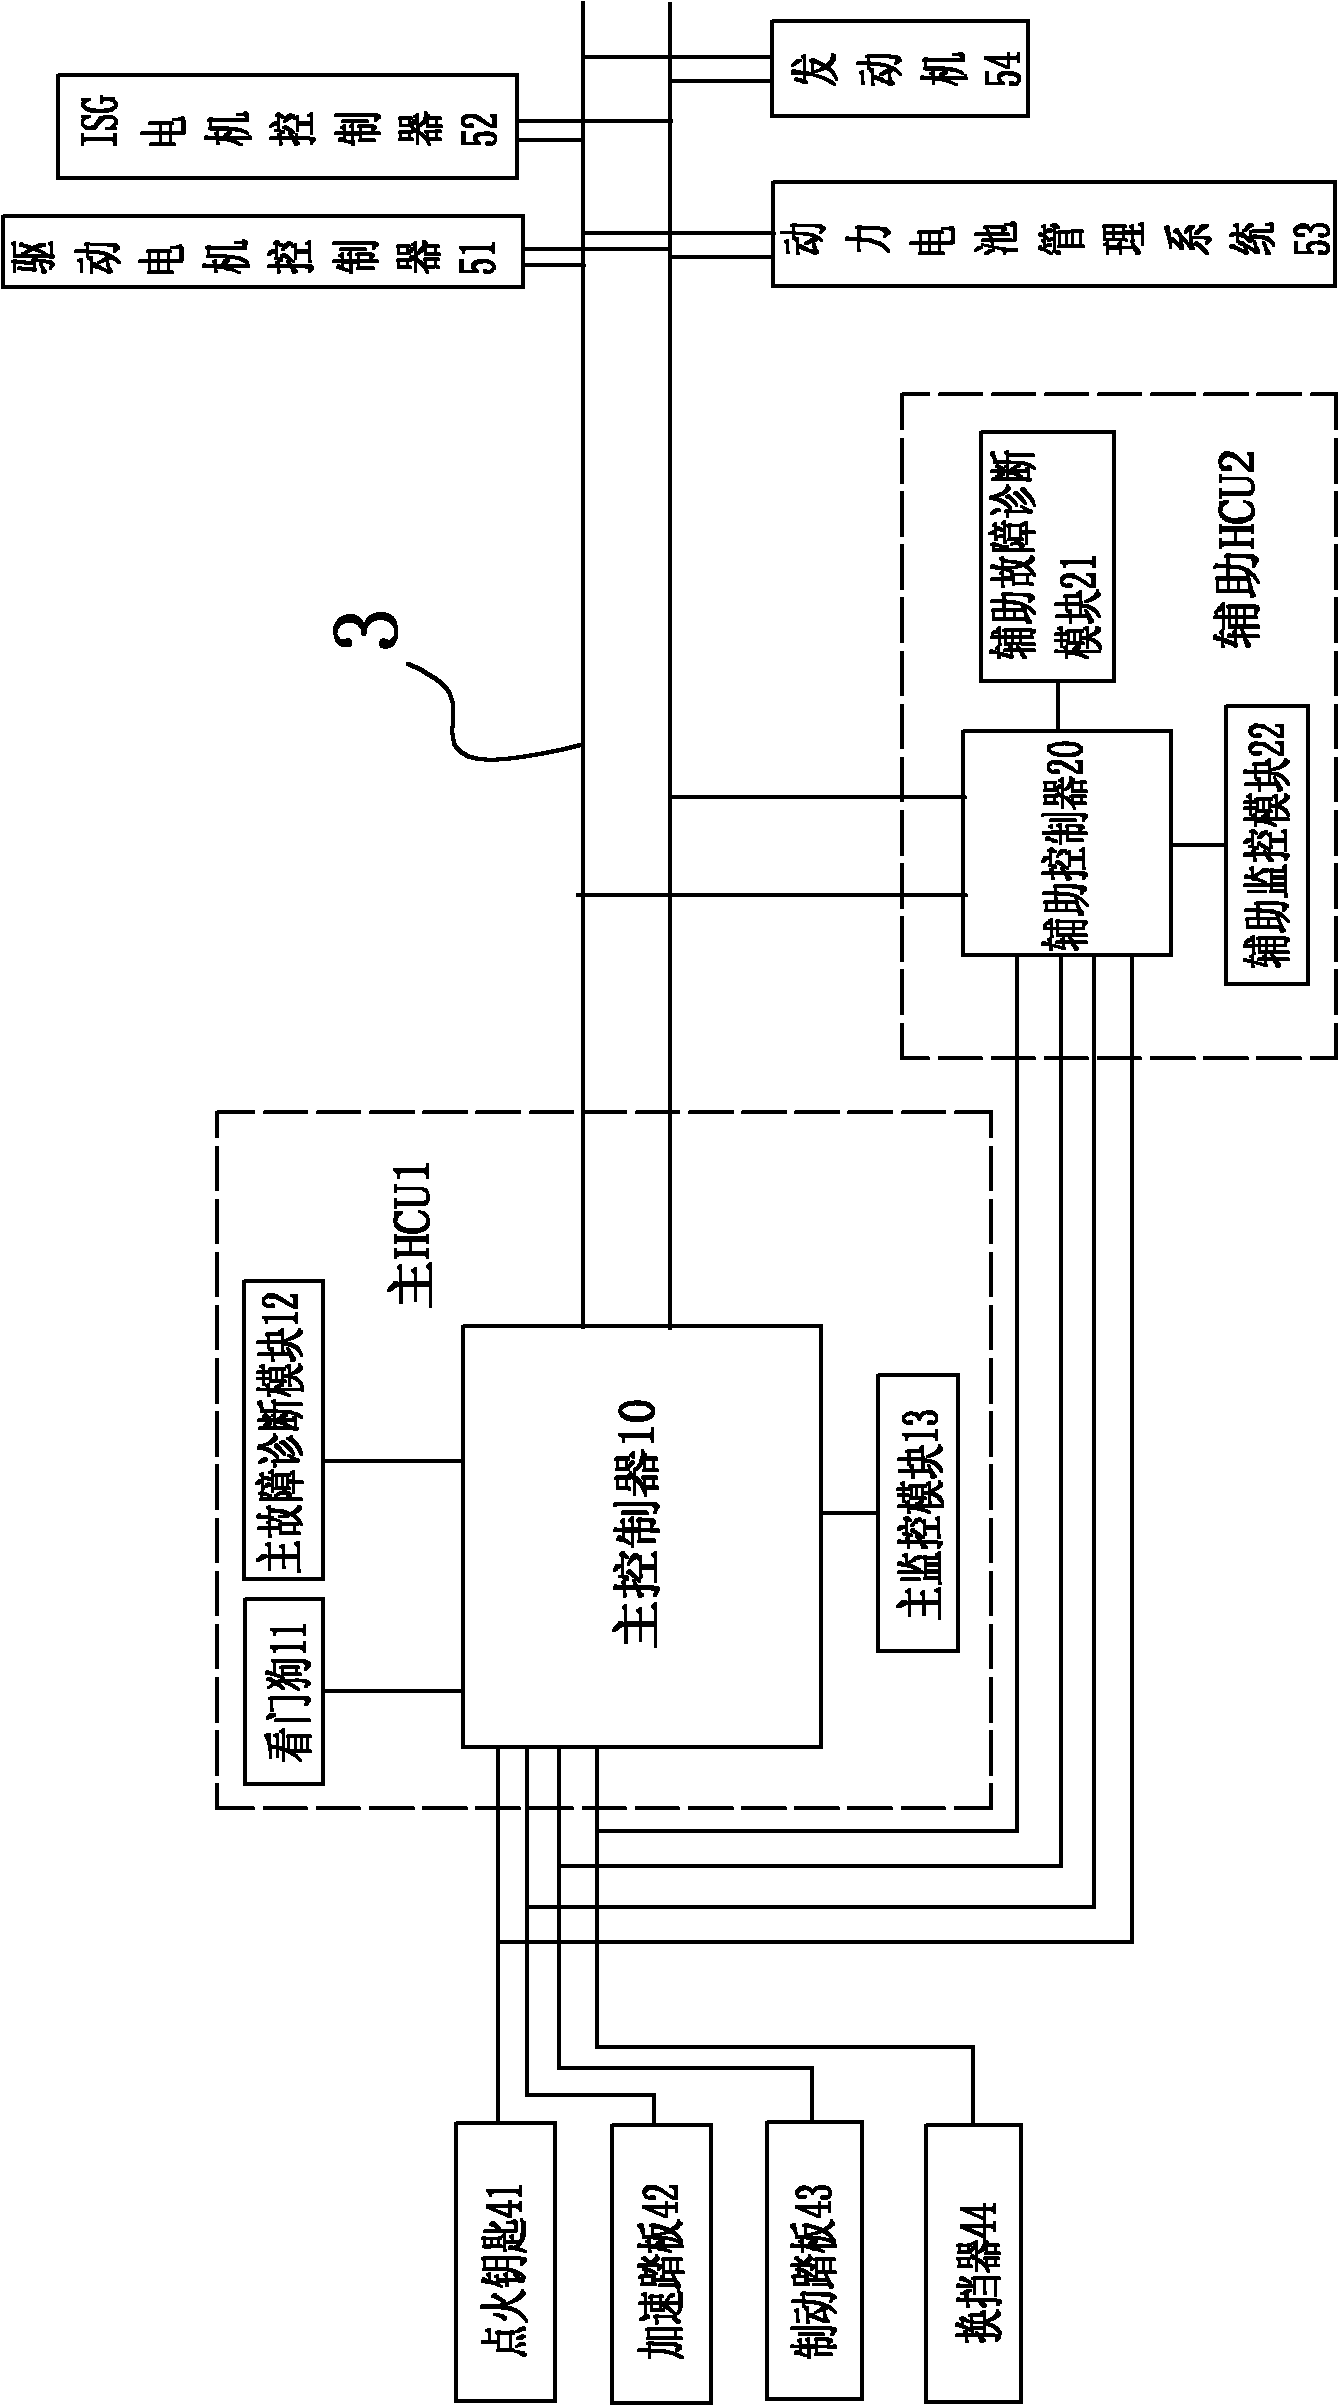 Double-HCU integrated control system of hybrid power vehicle